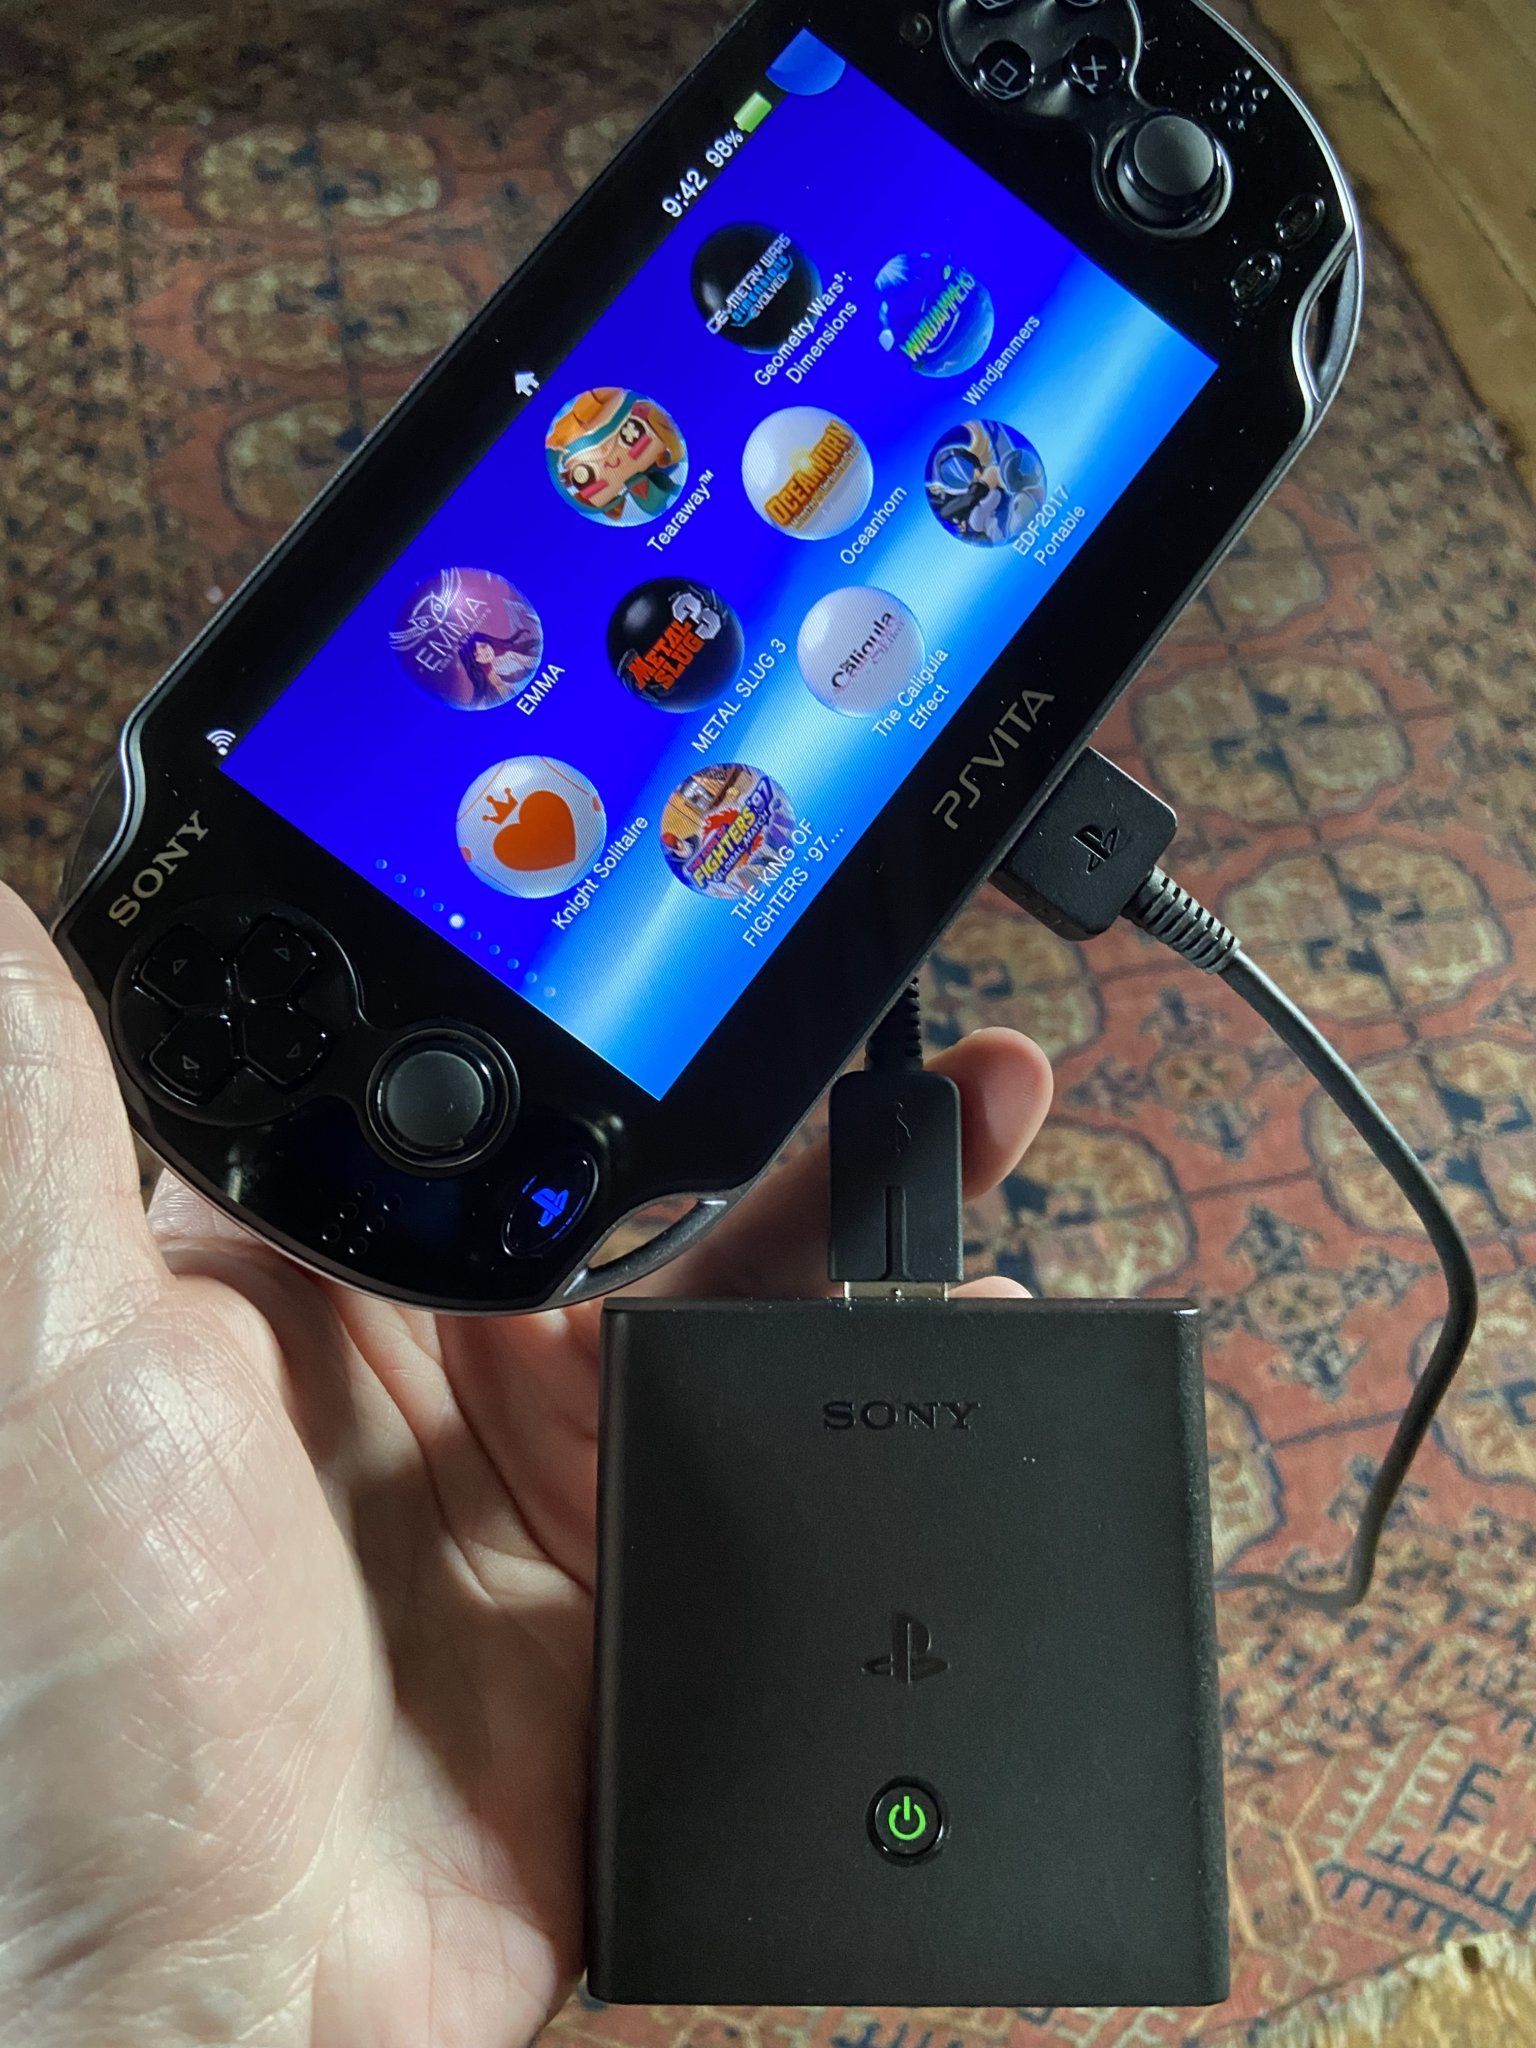 PlayStation Vita with the Portable charger attached